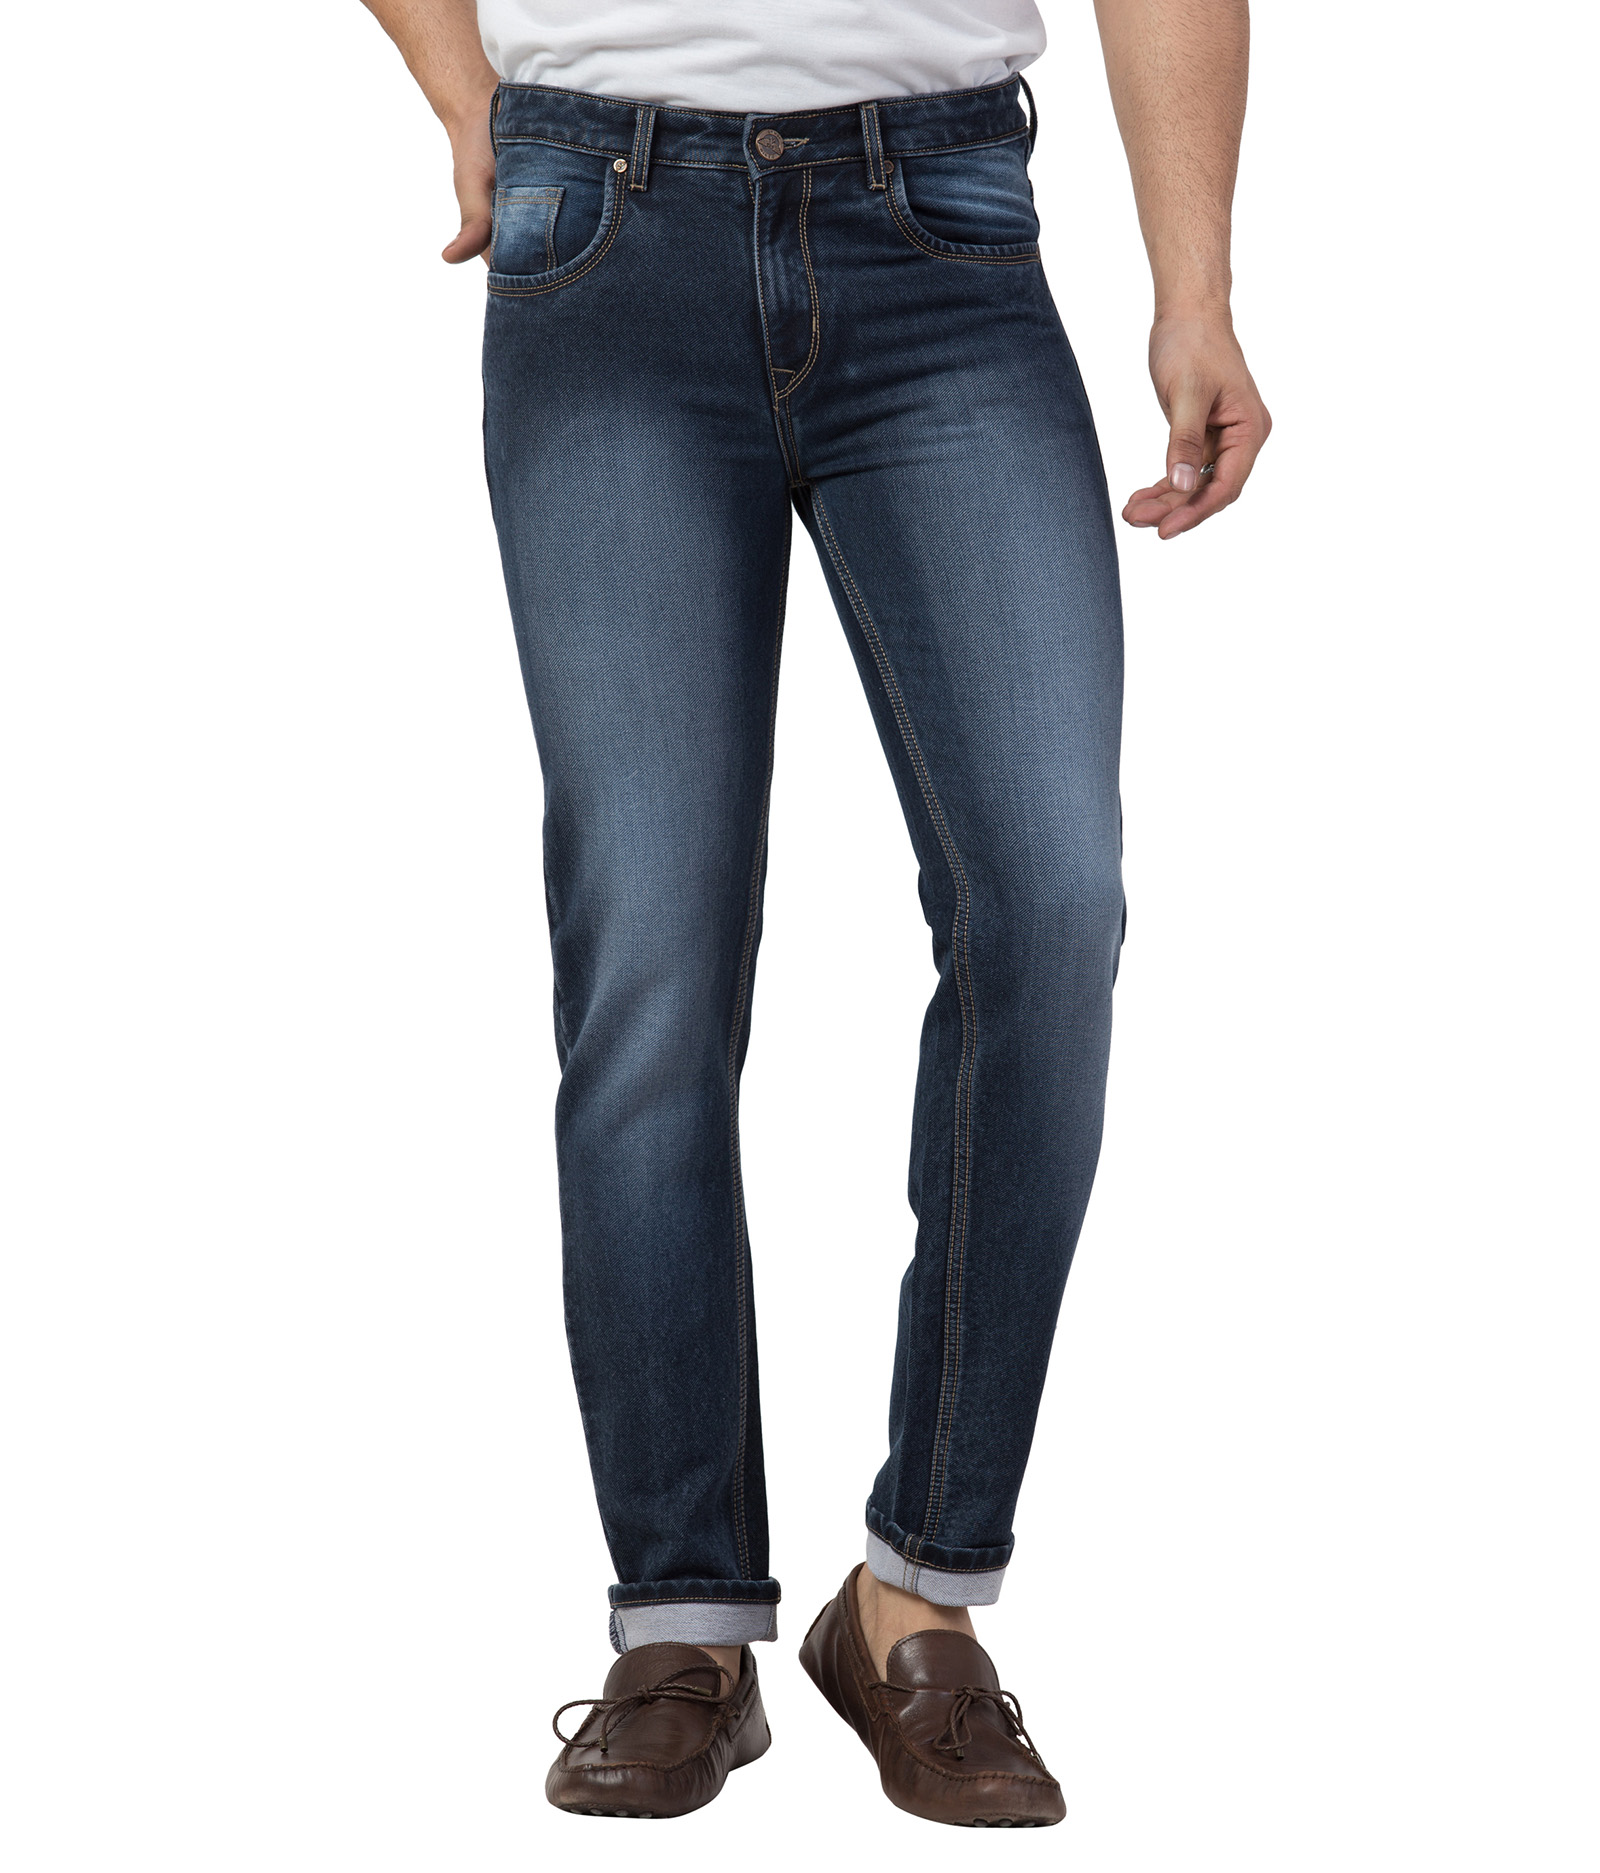 Buy Cliths Faded Blue Jeans For Men Slim Fit/ Stylish Jeans For Mens ...